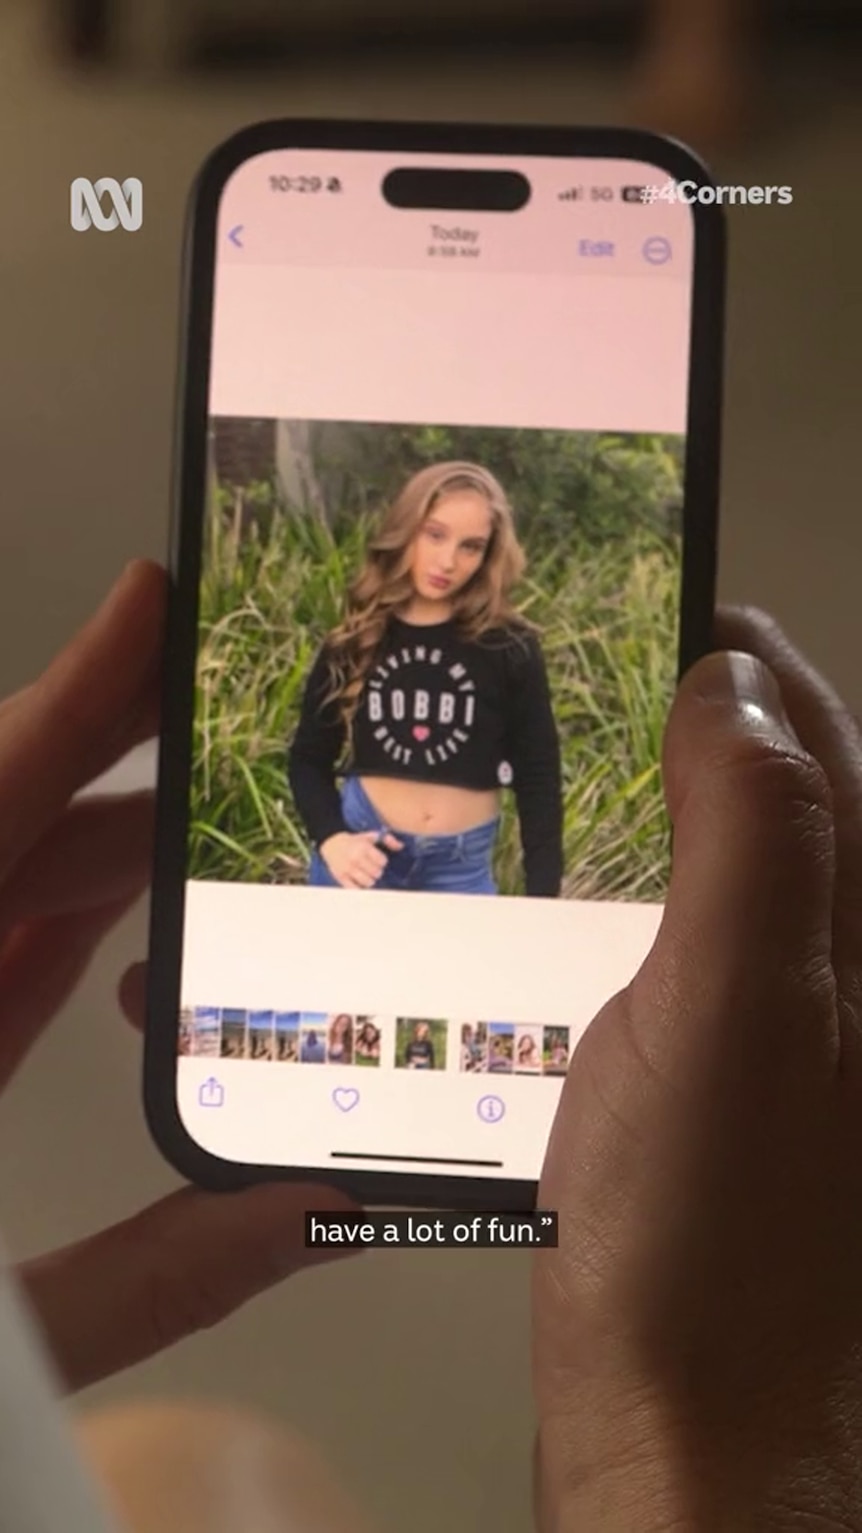 A white person's hand holds a smartphone showing a white girl posing in front of some greenery 